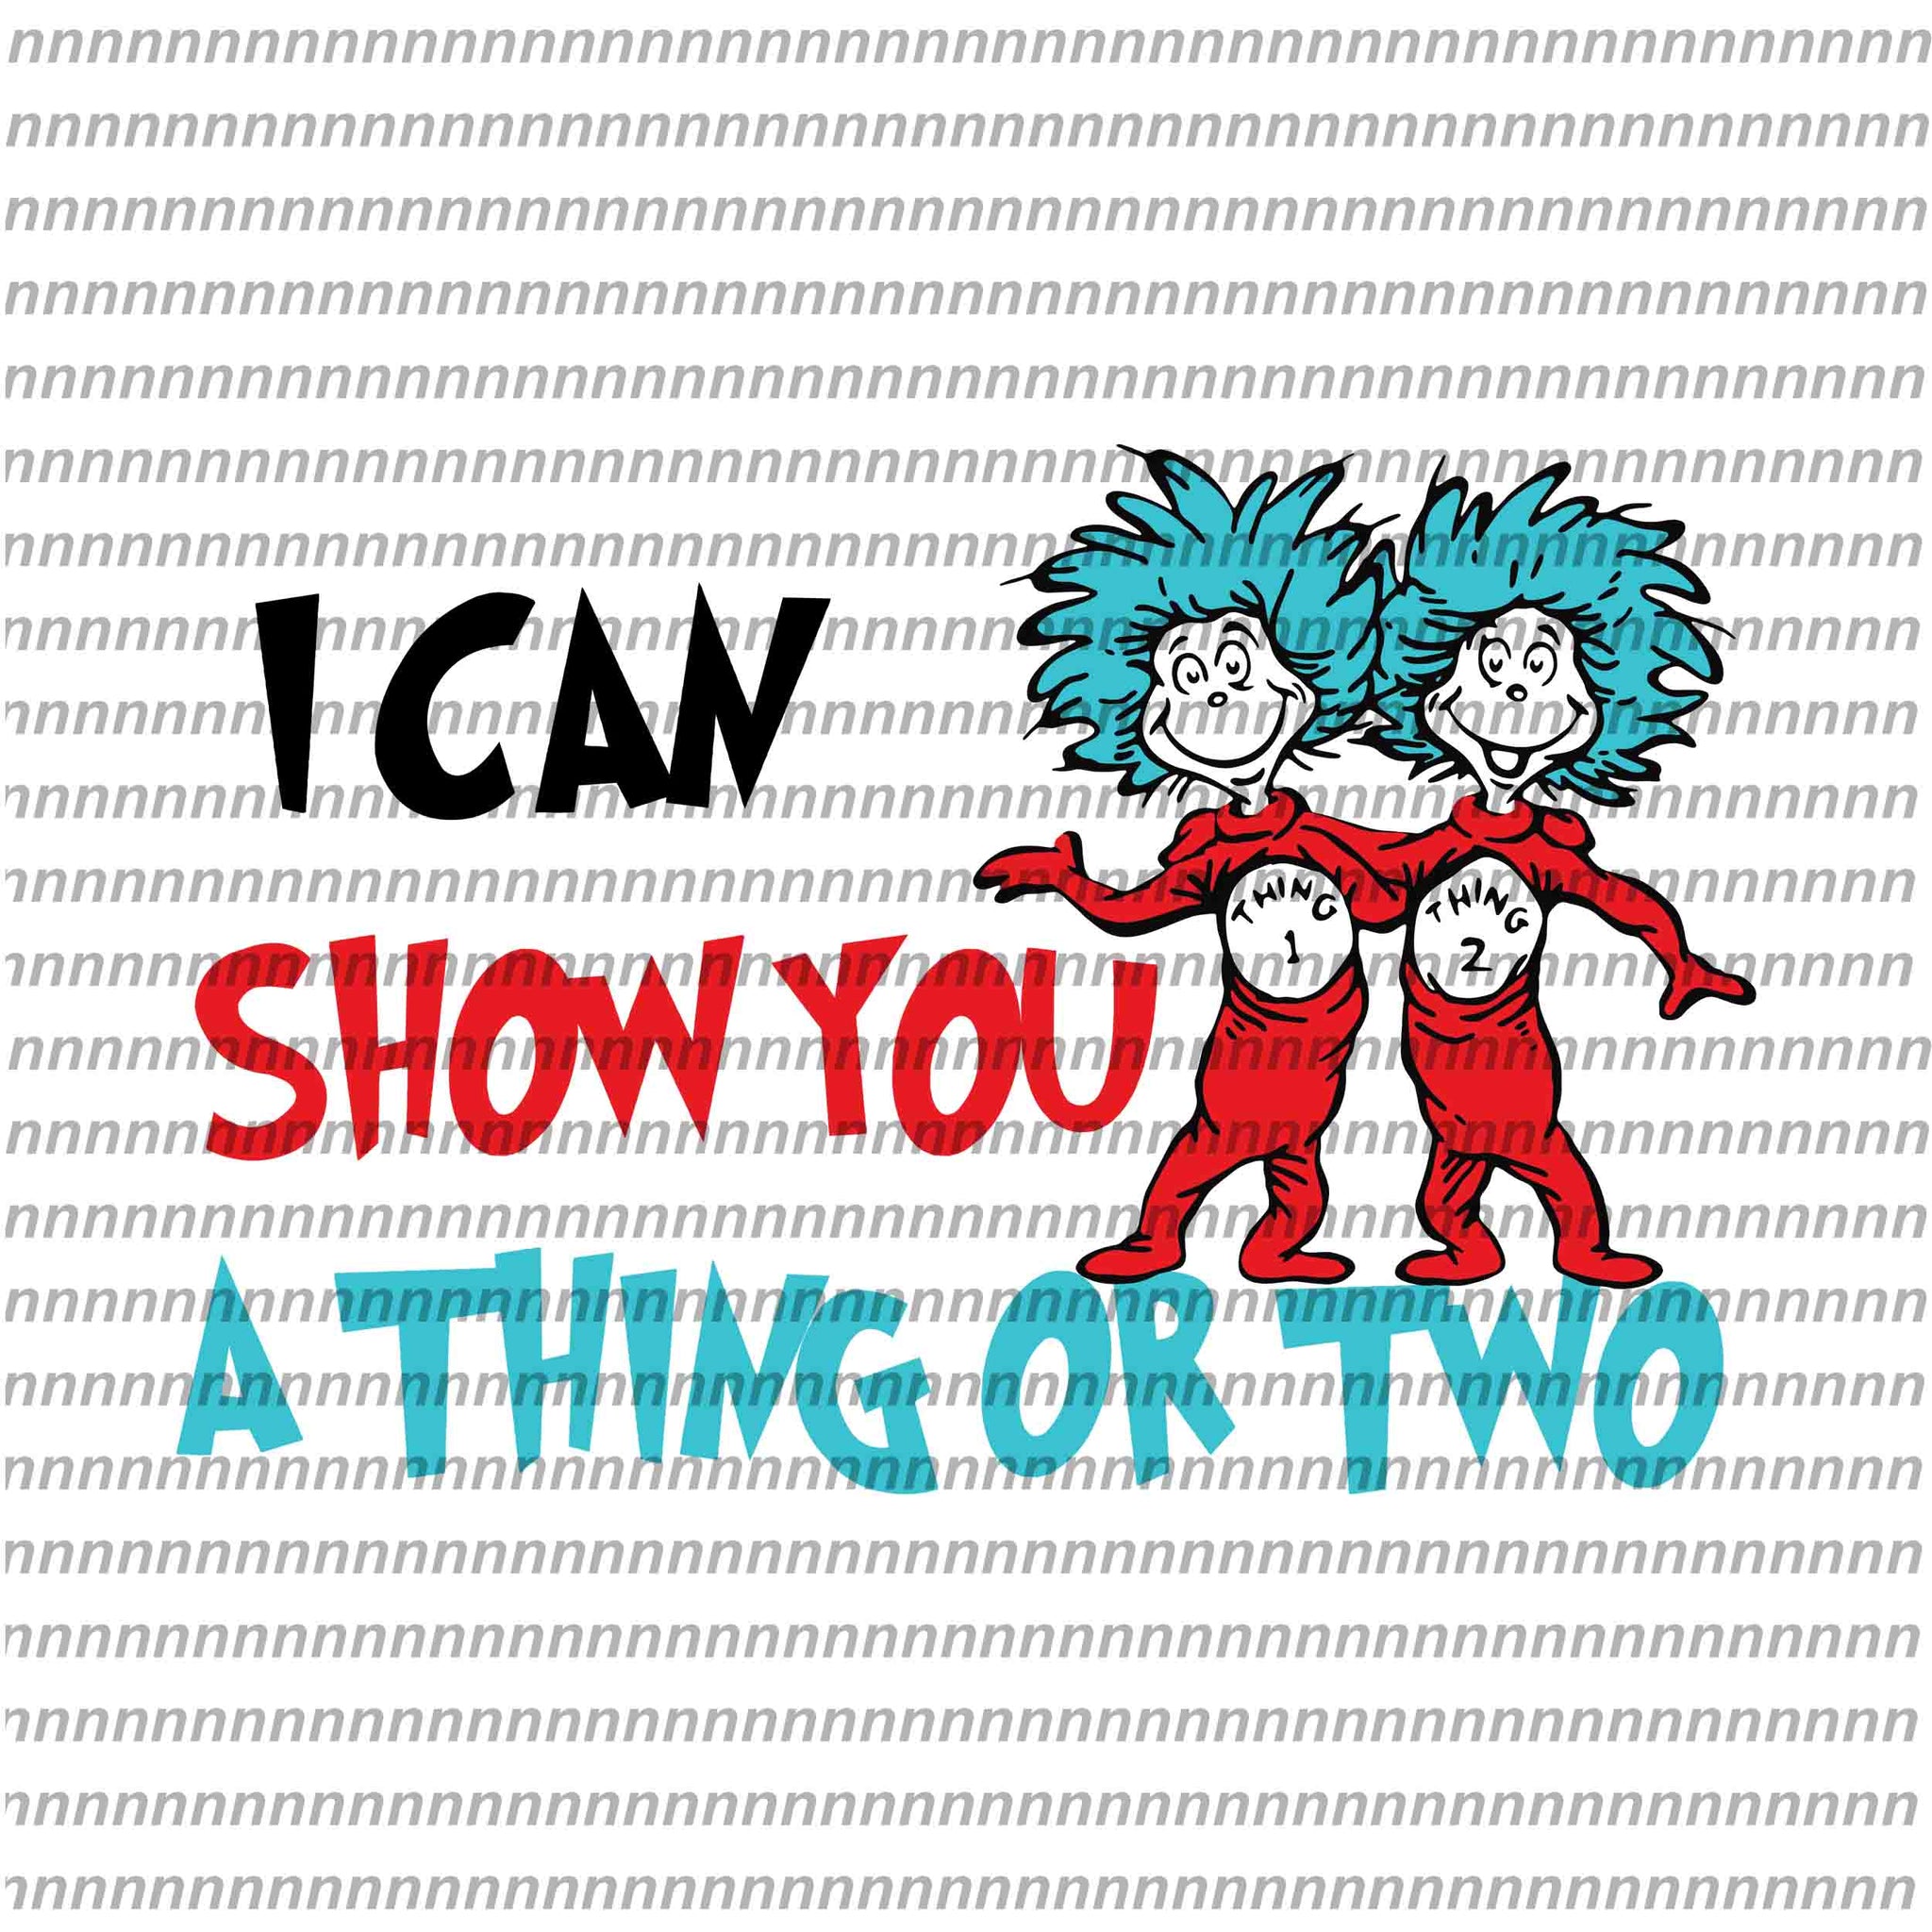 I can show you a thing or two, dr seuss svg,dr seuss quote, dr seuss design, Cat in the hat svg, thing 1 thing 2 thing 3, svg, png, dxf, eps file